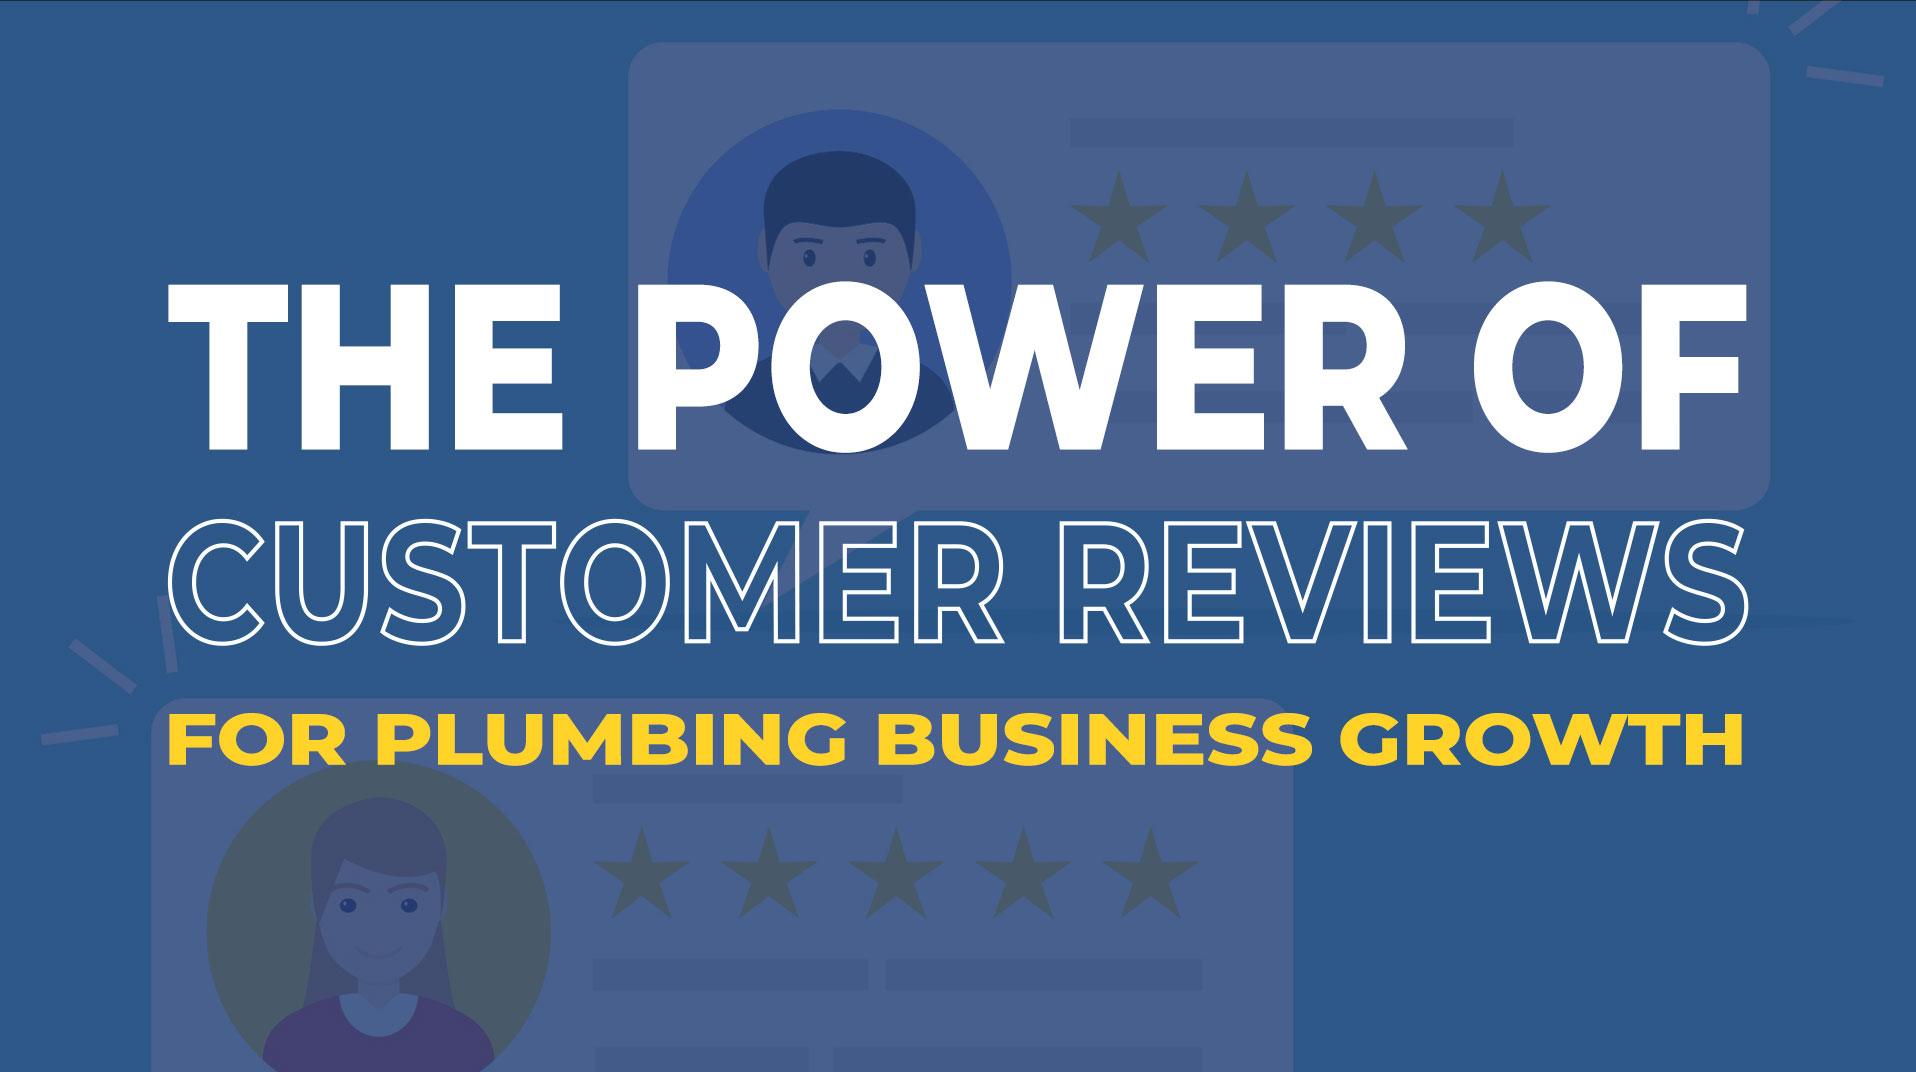 The Power of Customer Reviews for Plumbing Business Growth